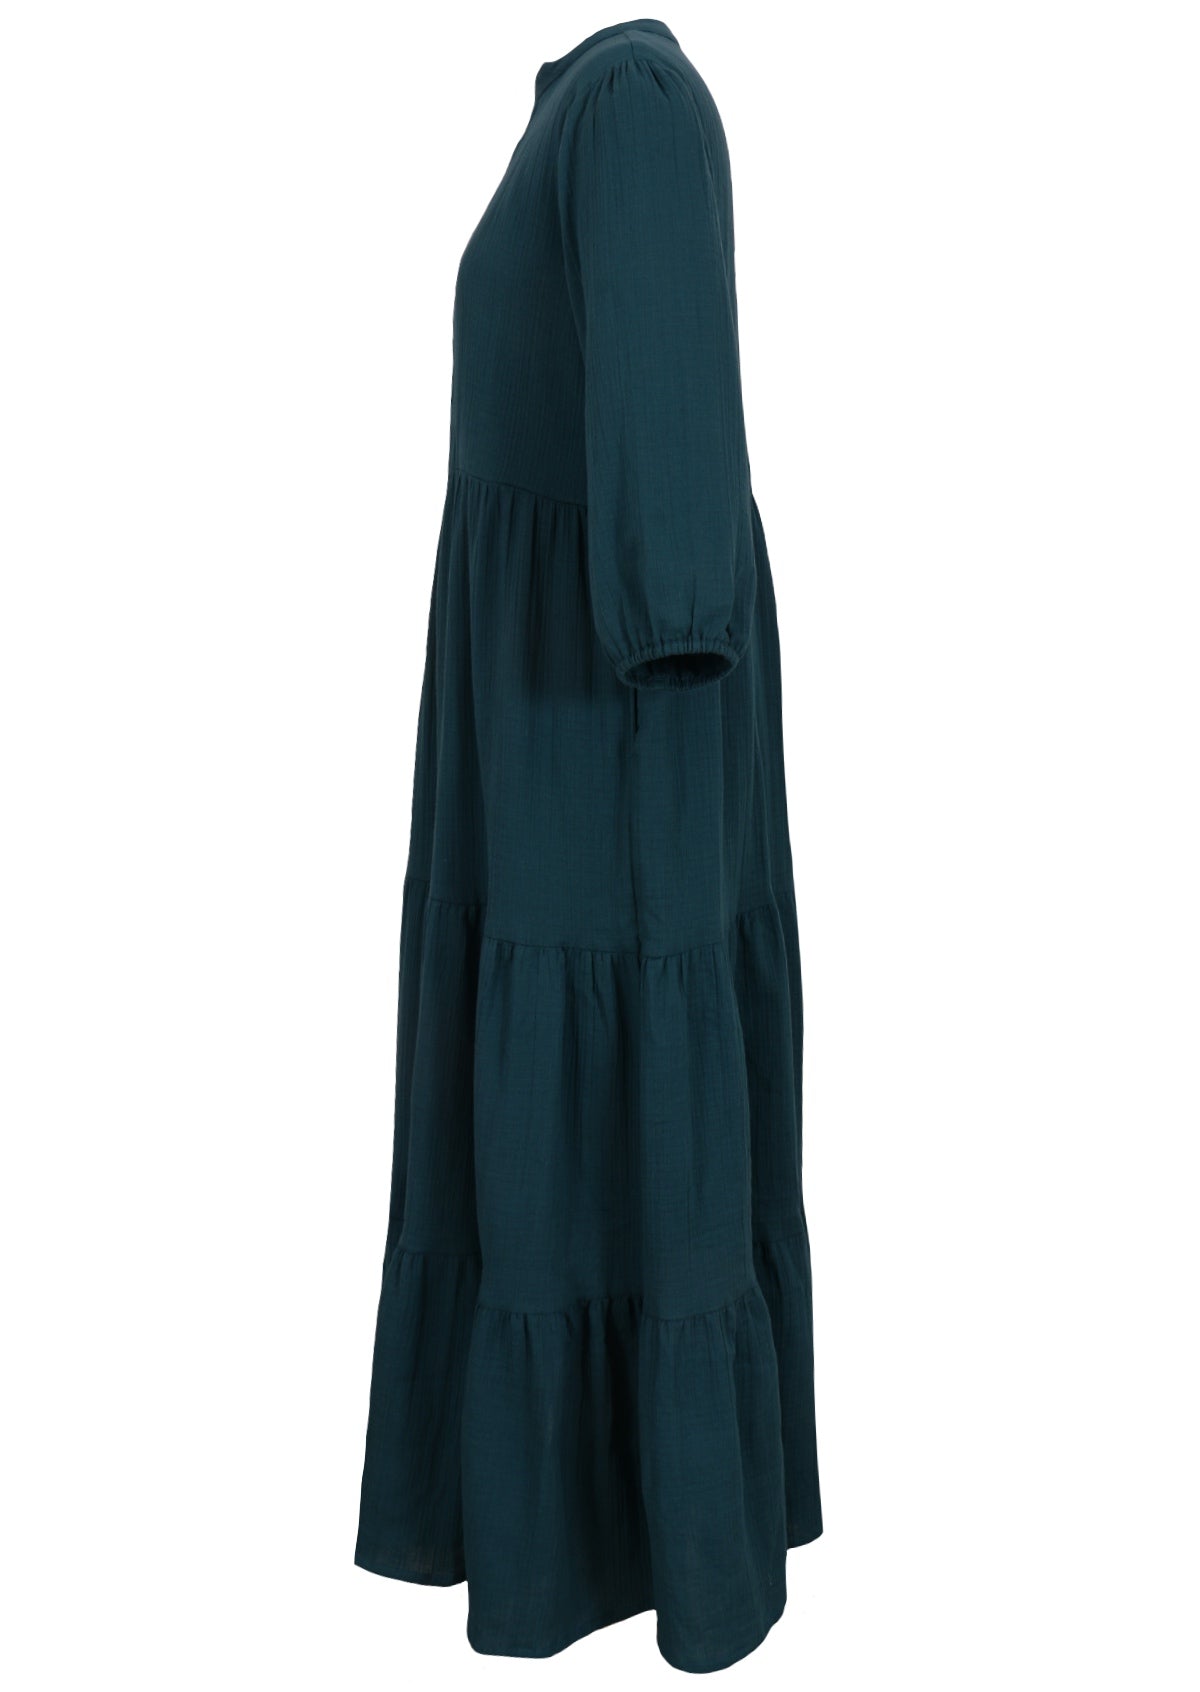 Maxi dress made from two layer of lightweight cotton gauze has a puckered, lived-in texture